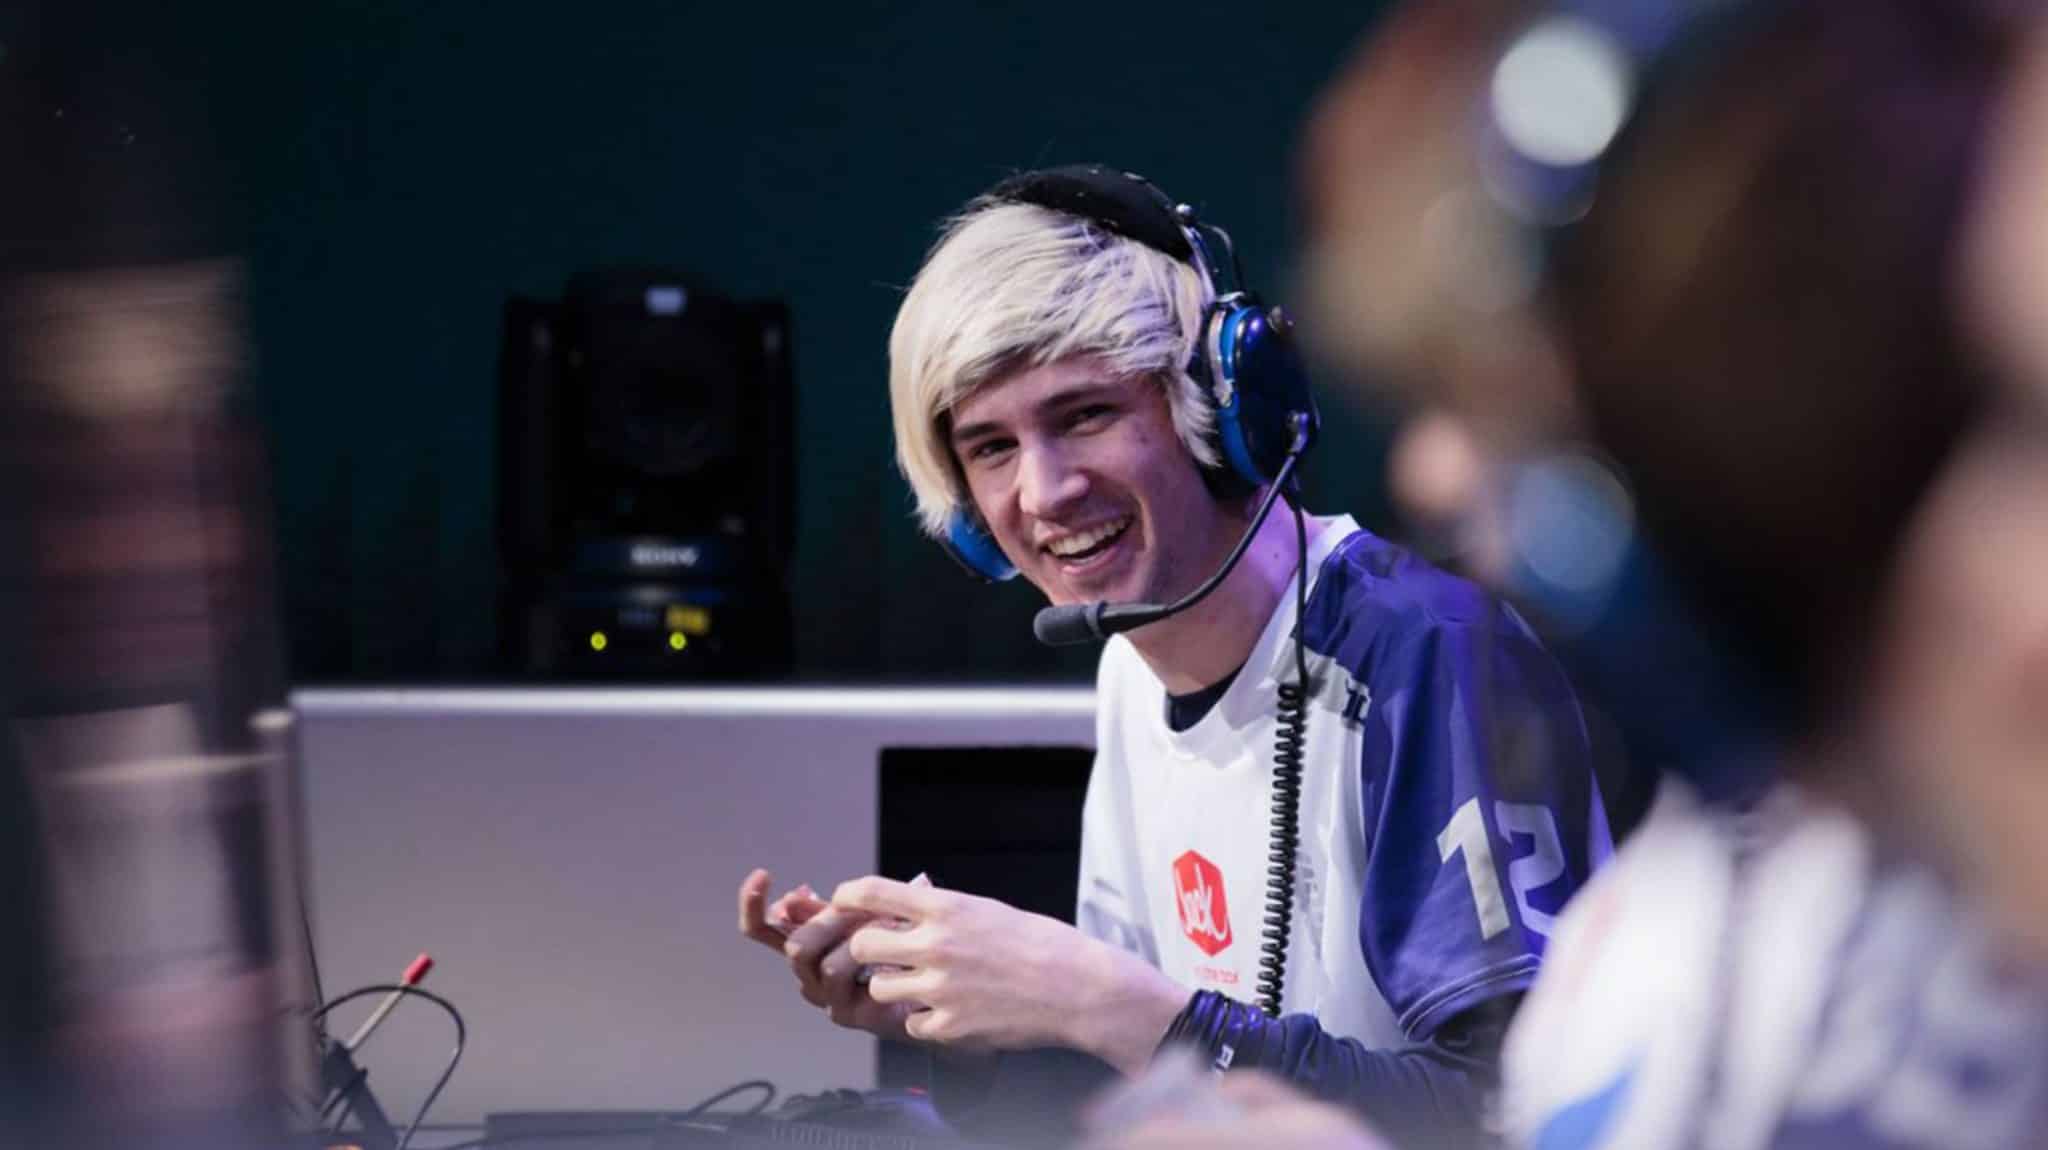 xQc on stage in the Overwatch league